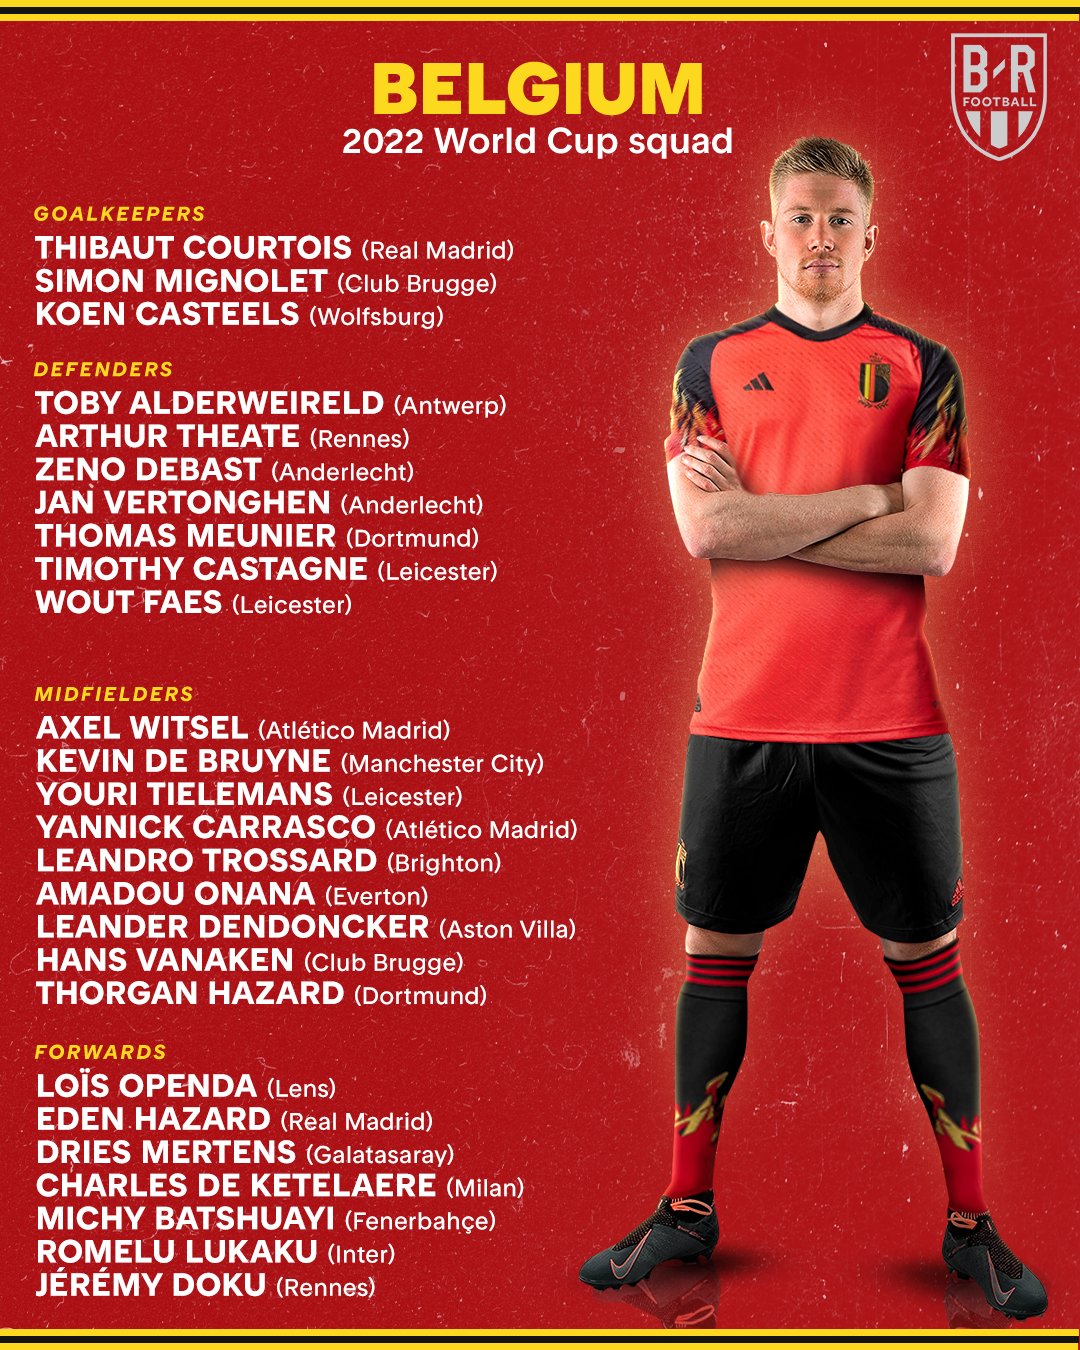 B/R Football on Twitter "Belgium drop their roster for the World Cup